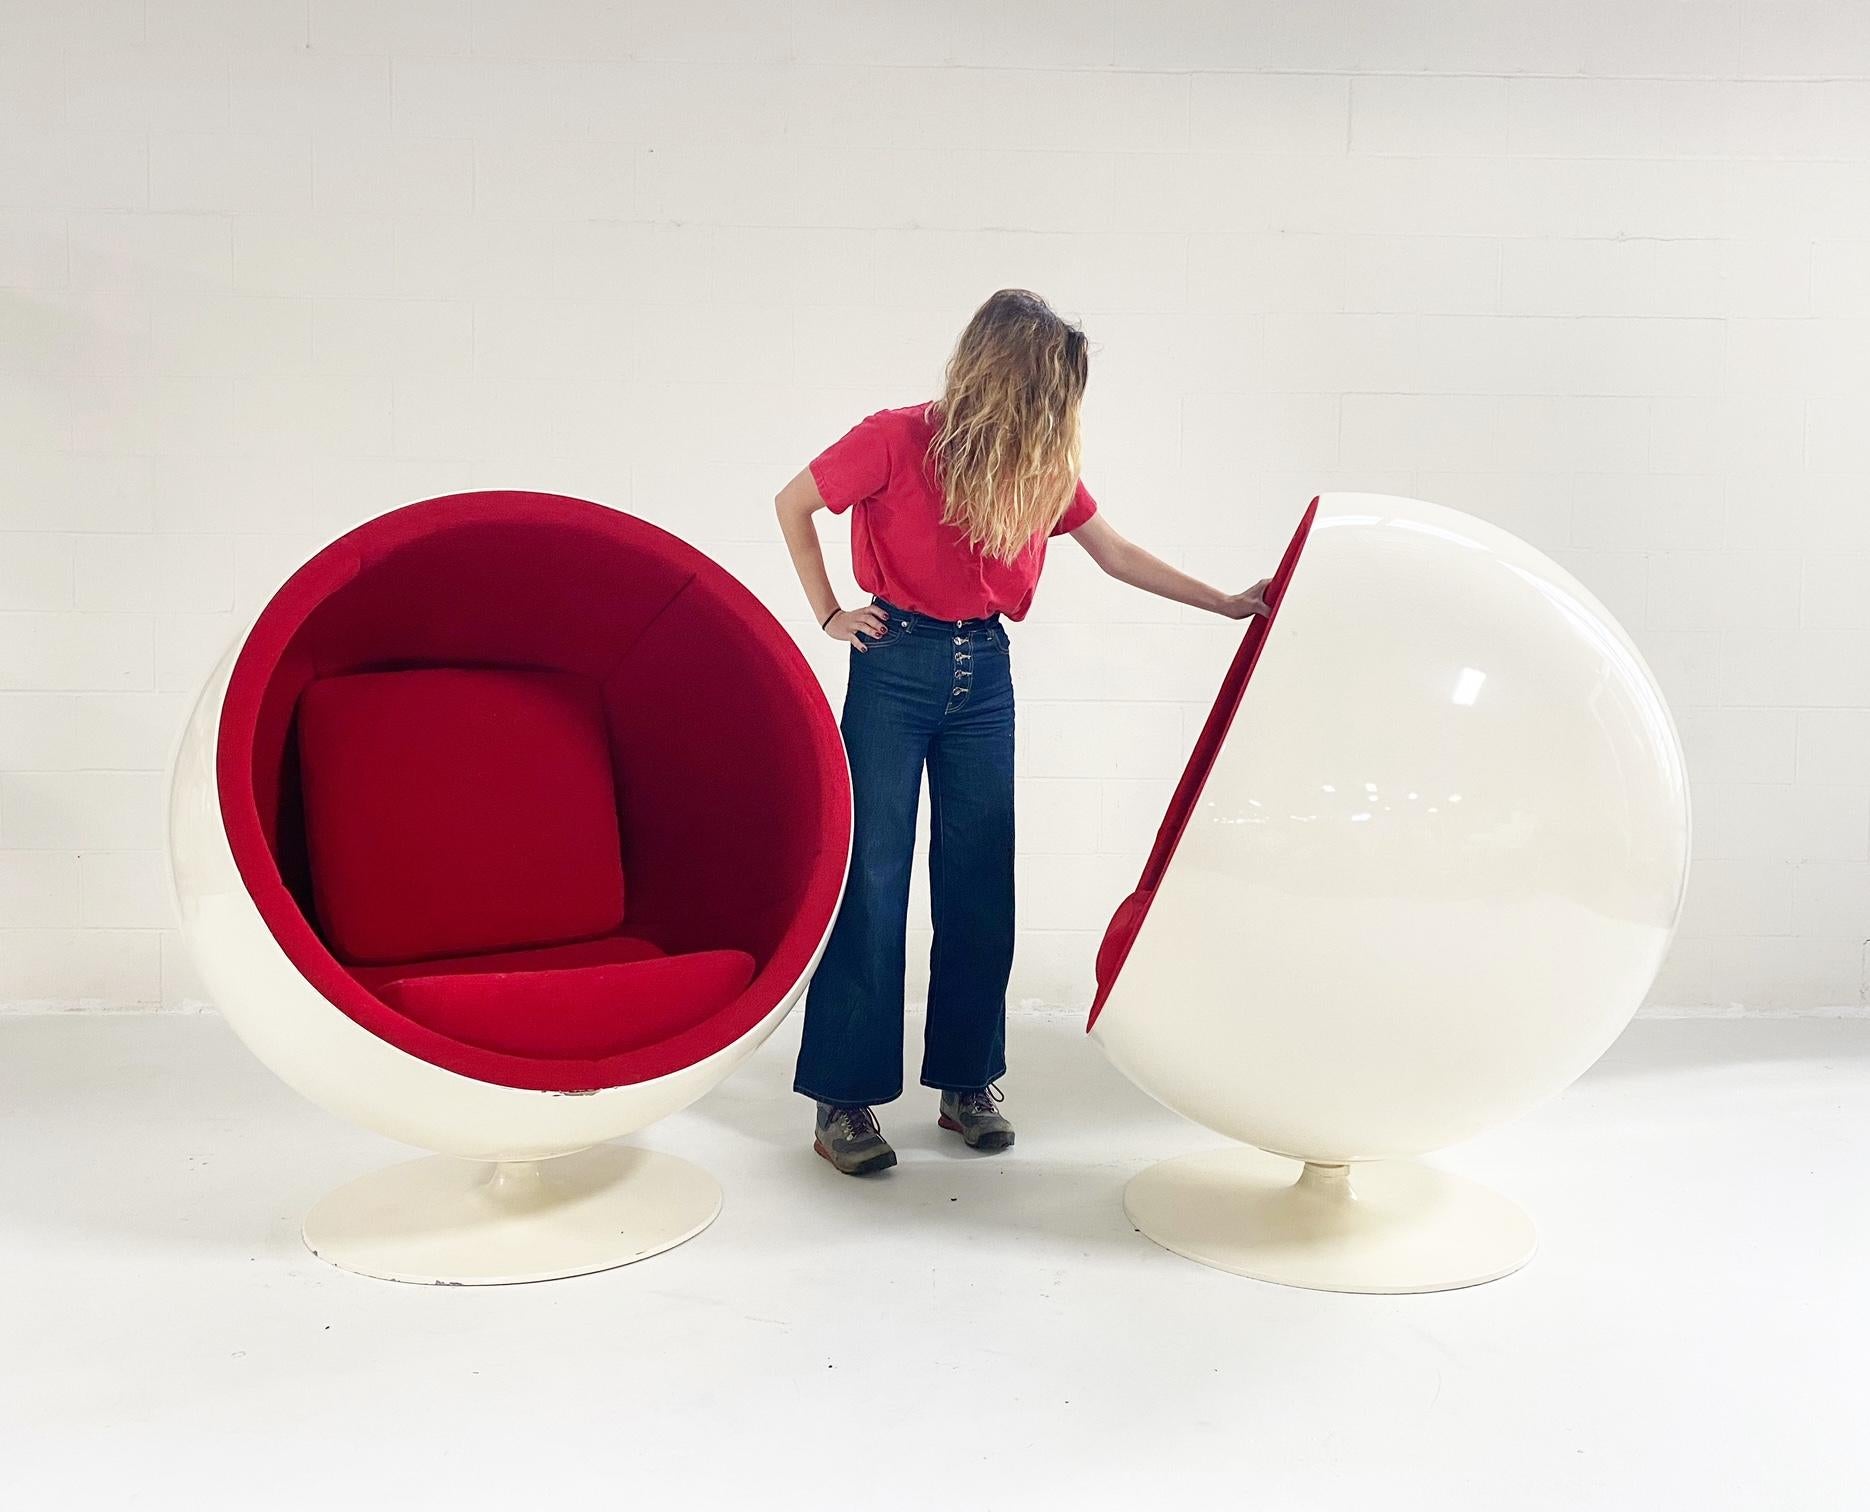 We love balls! Midcentury masterpieces. From Aarnio Originals website: The ball chair was designed in 1963 and debuted at the Cologne Furniture Fair in 1966. The chair is one of the most famous and beloved classics of Finnish design and it was the